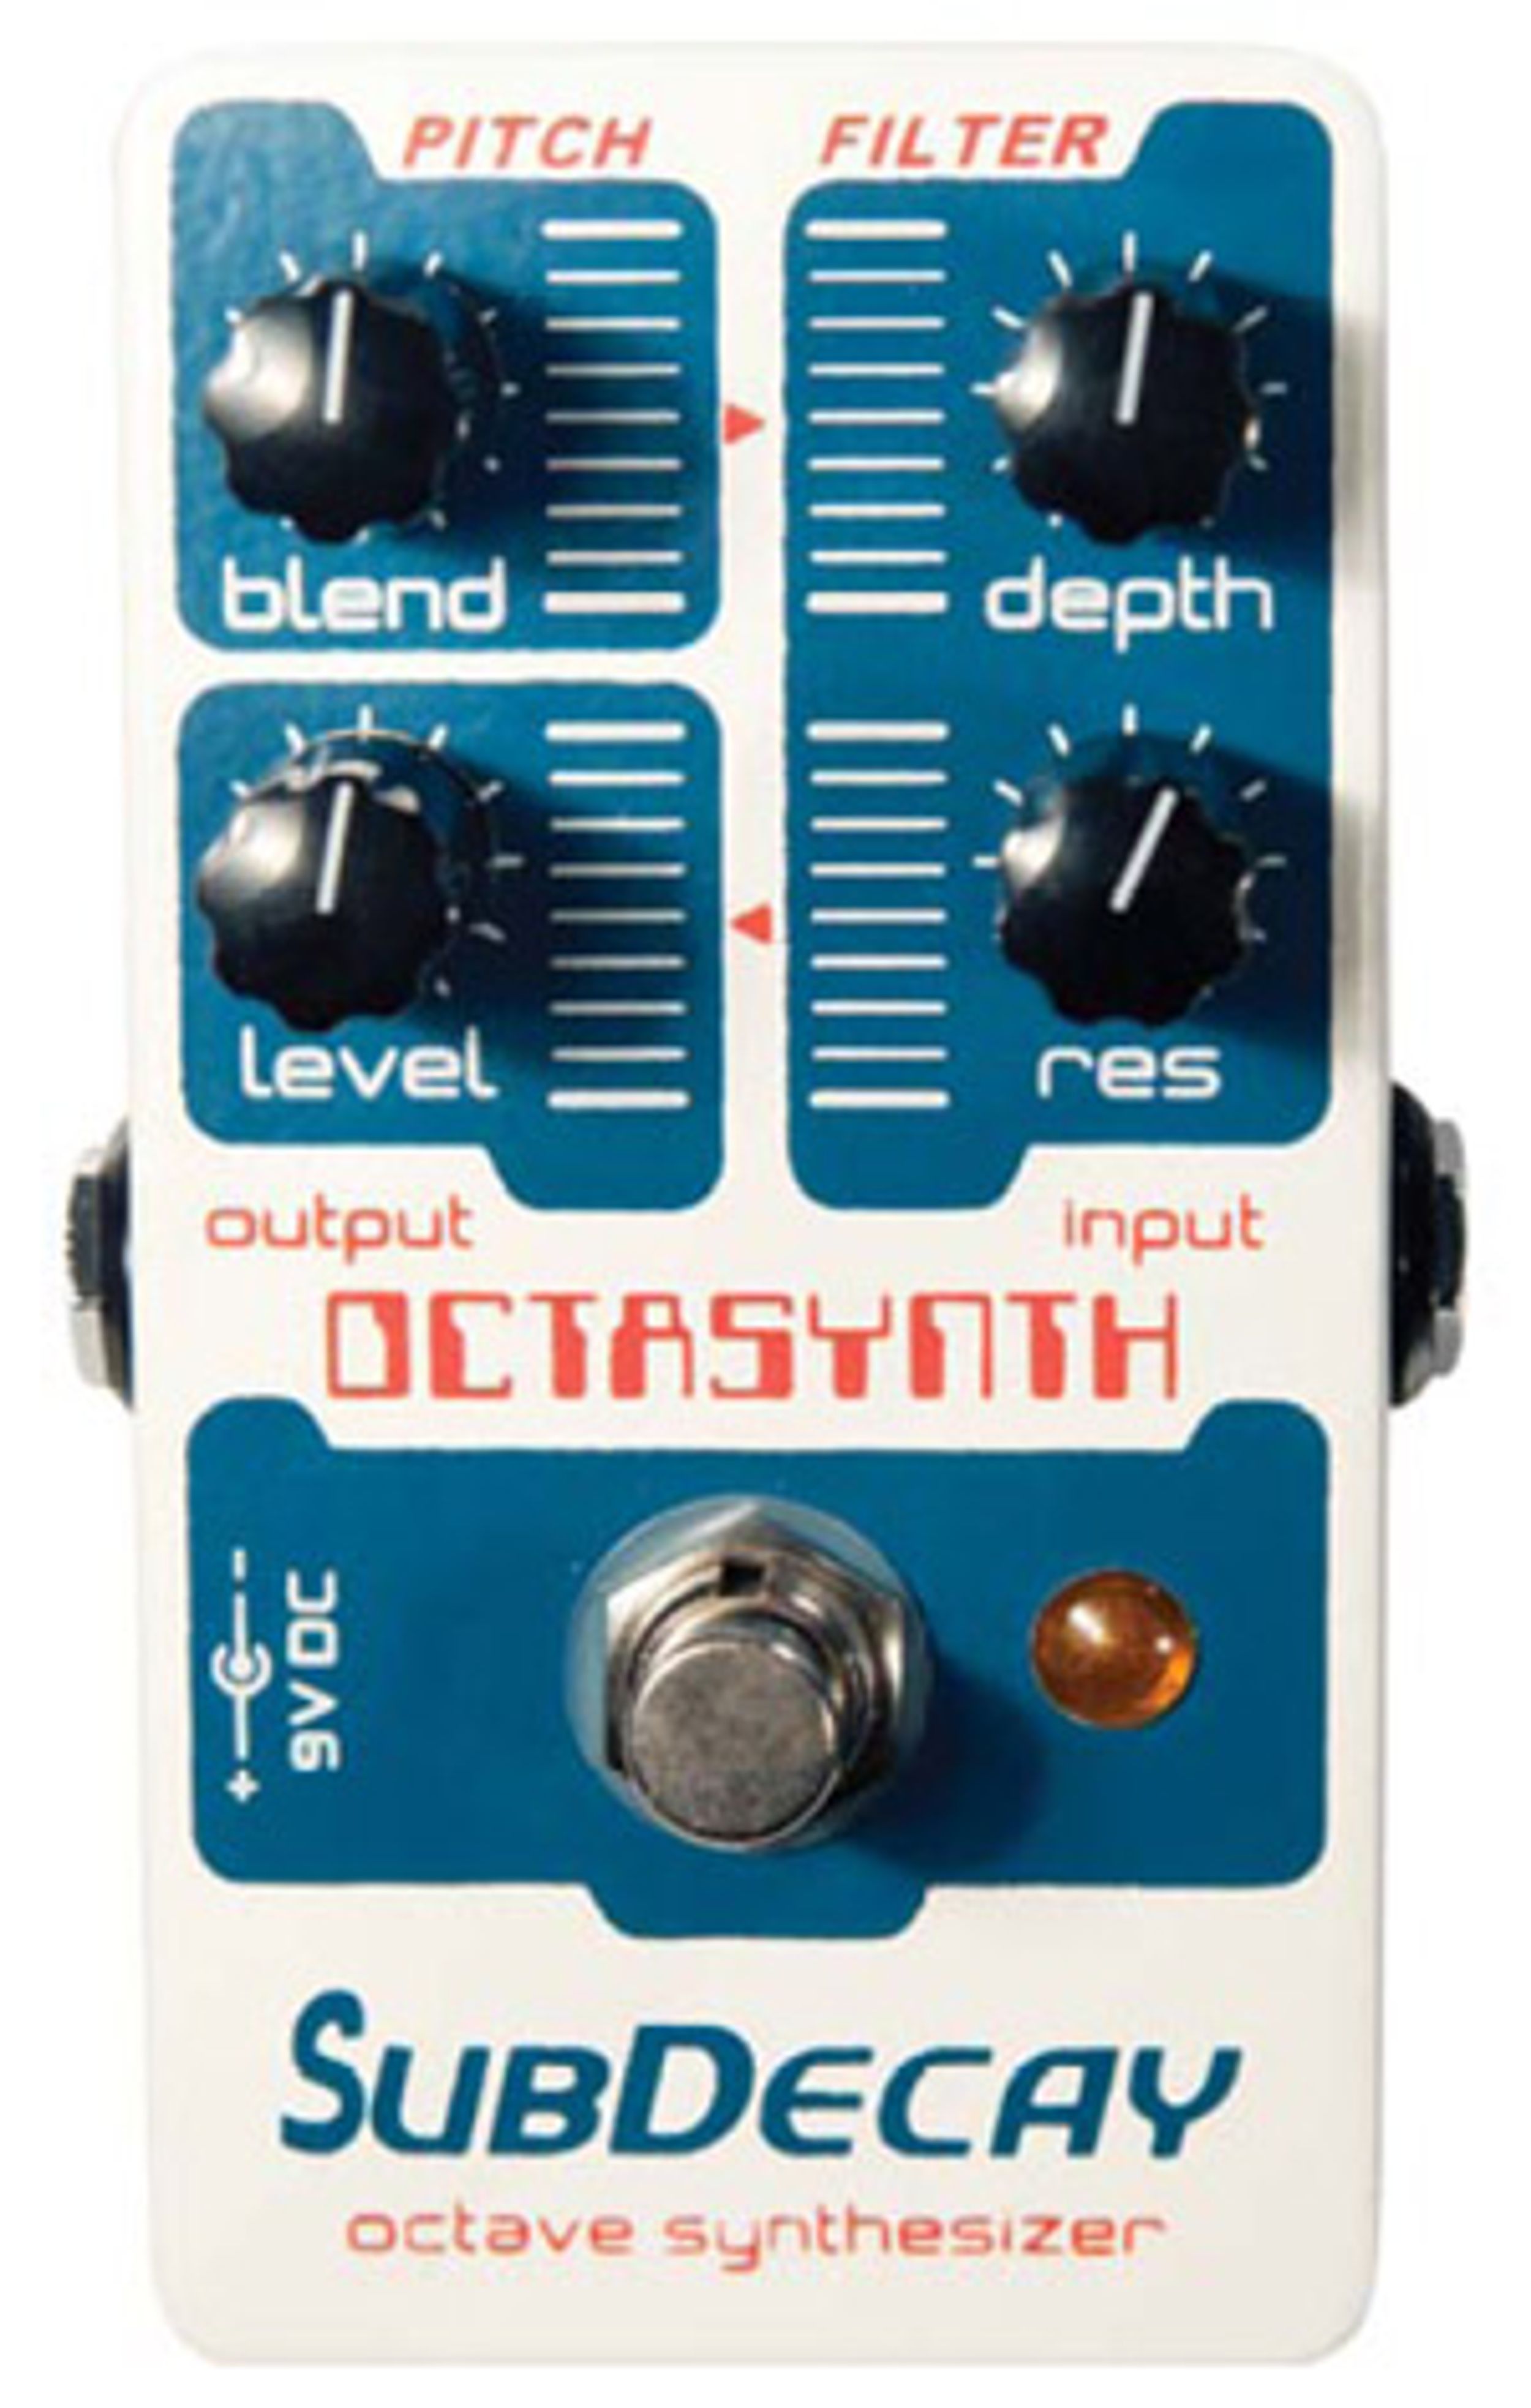 Subdecay Octasynth Pedal Review